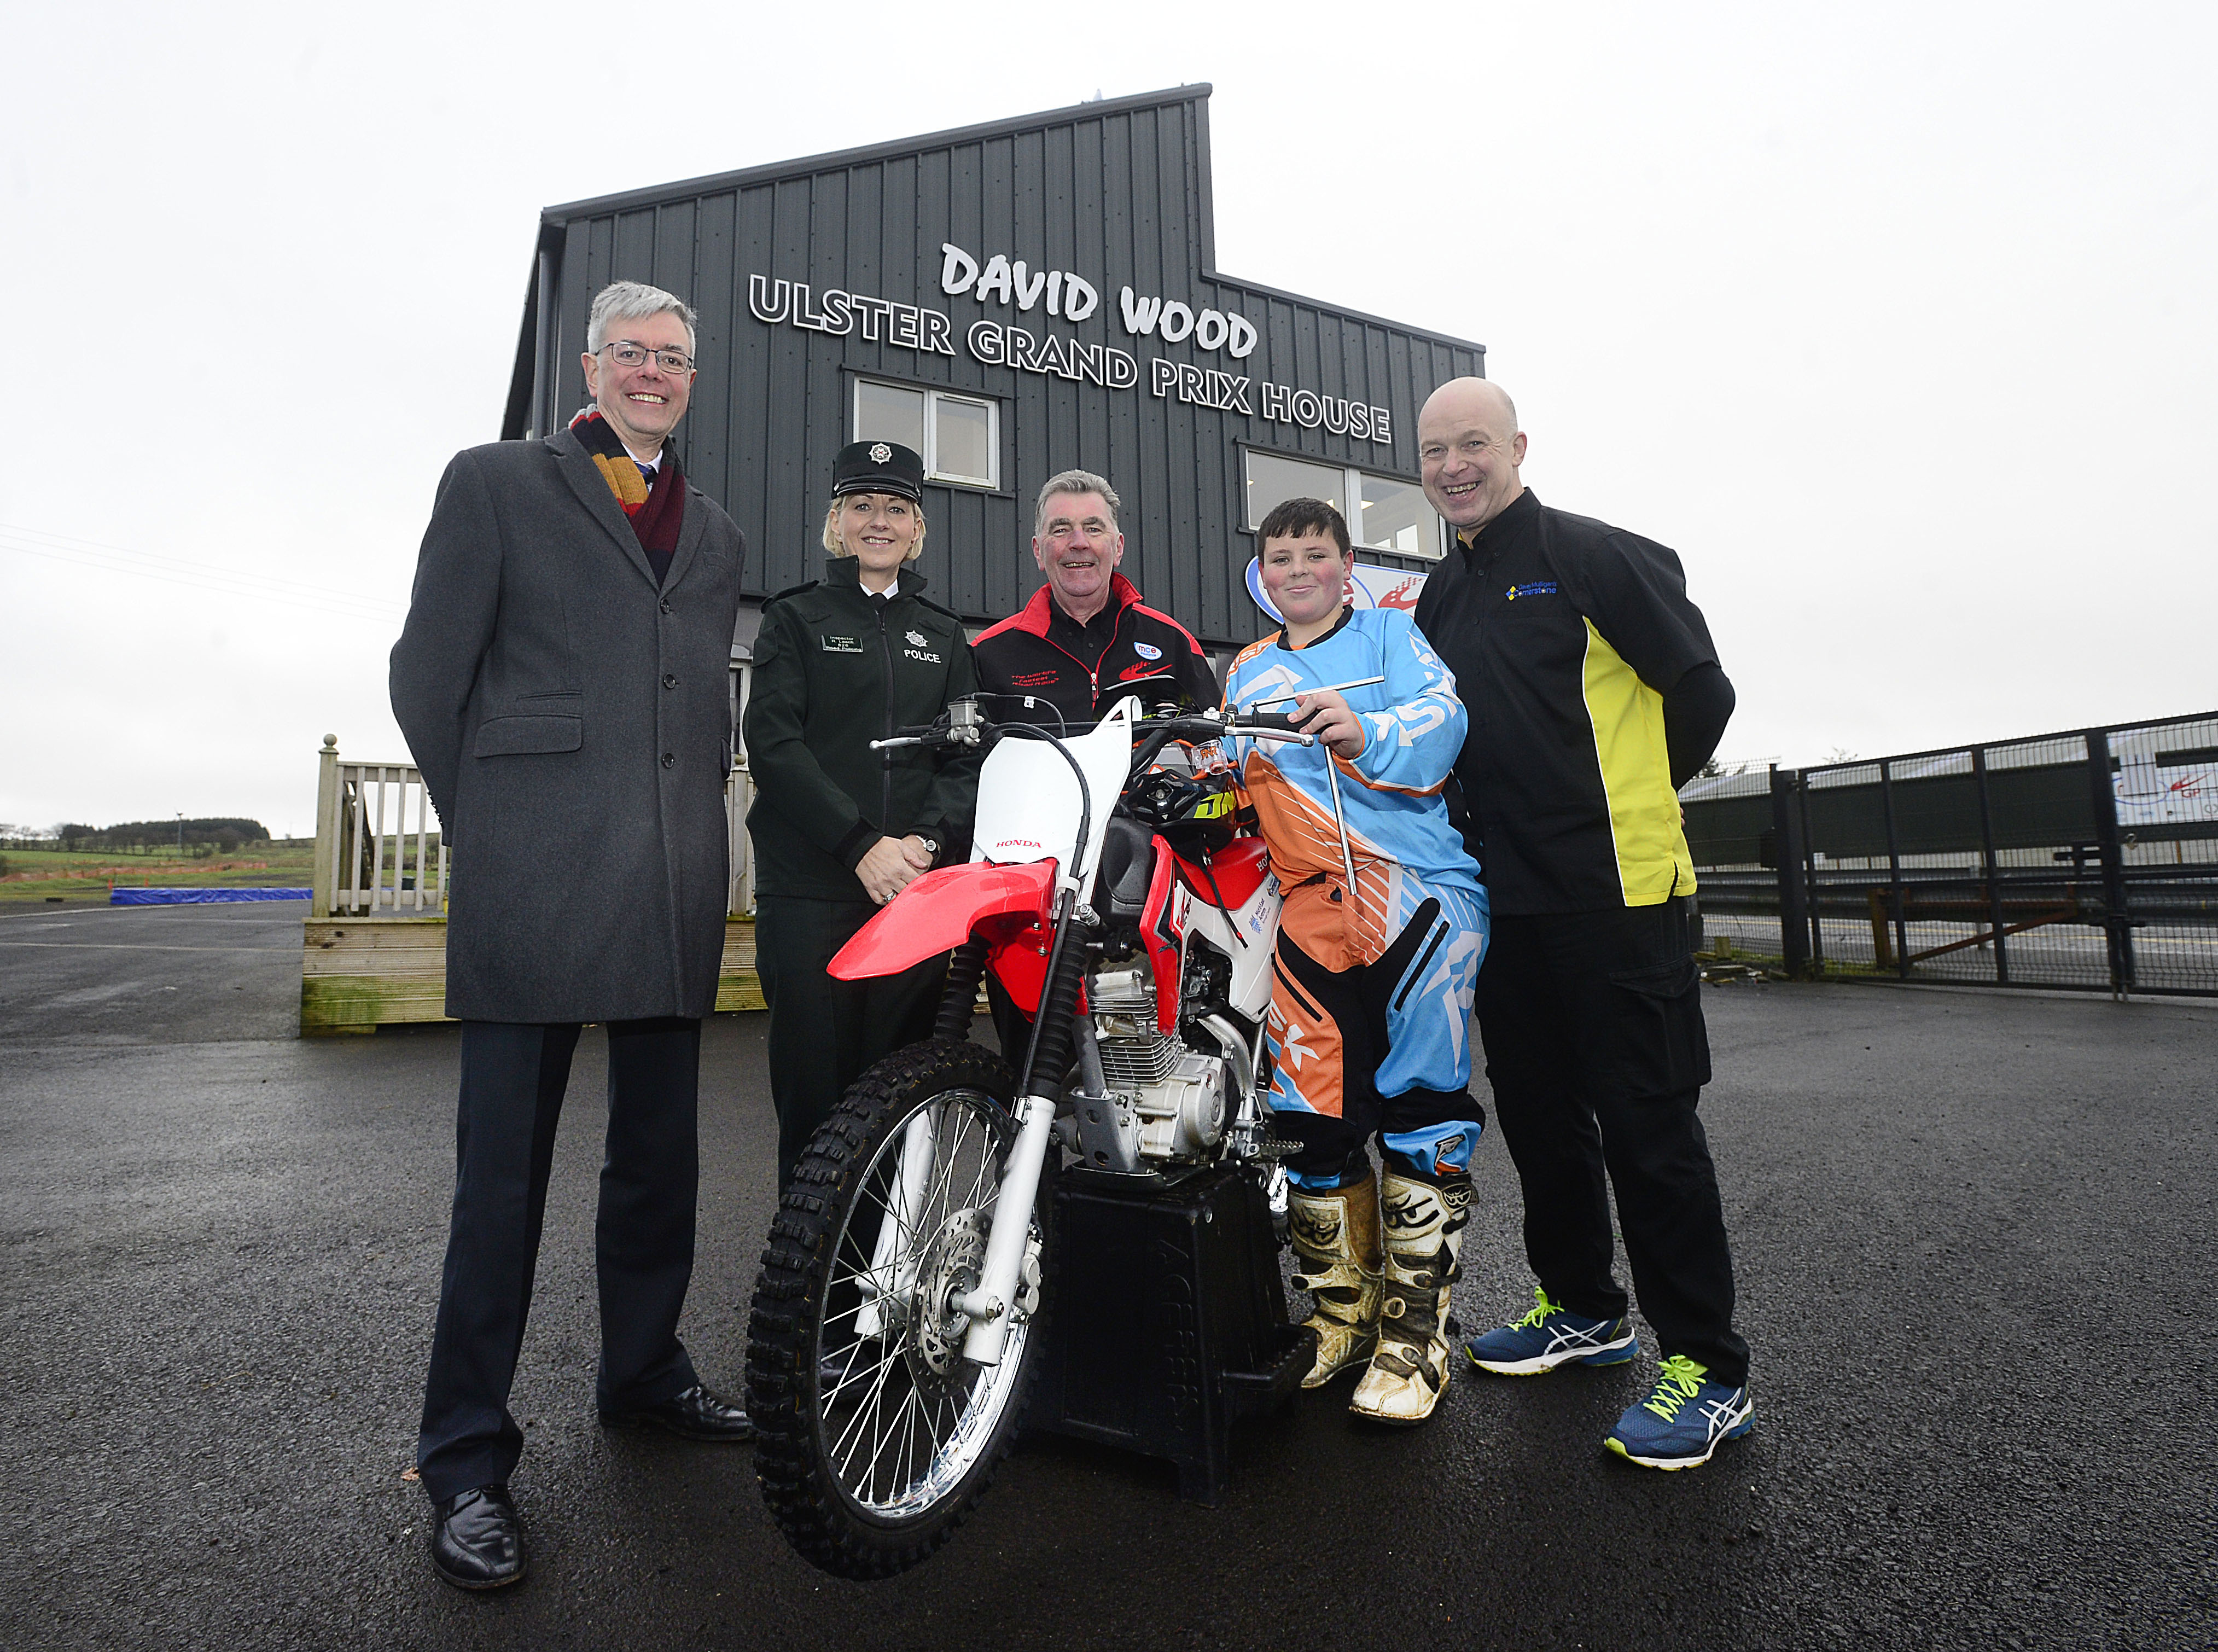 Motorcycle education project for young people launched by MCE Ulster Grand Prix with Department of Justice funding